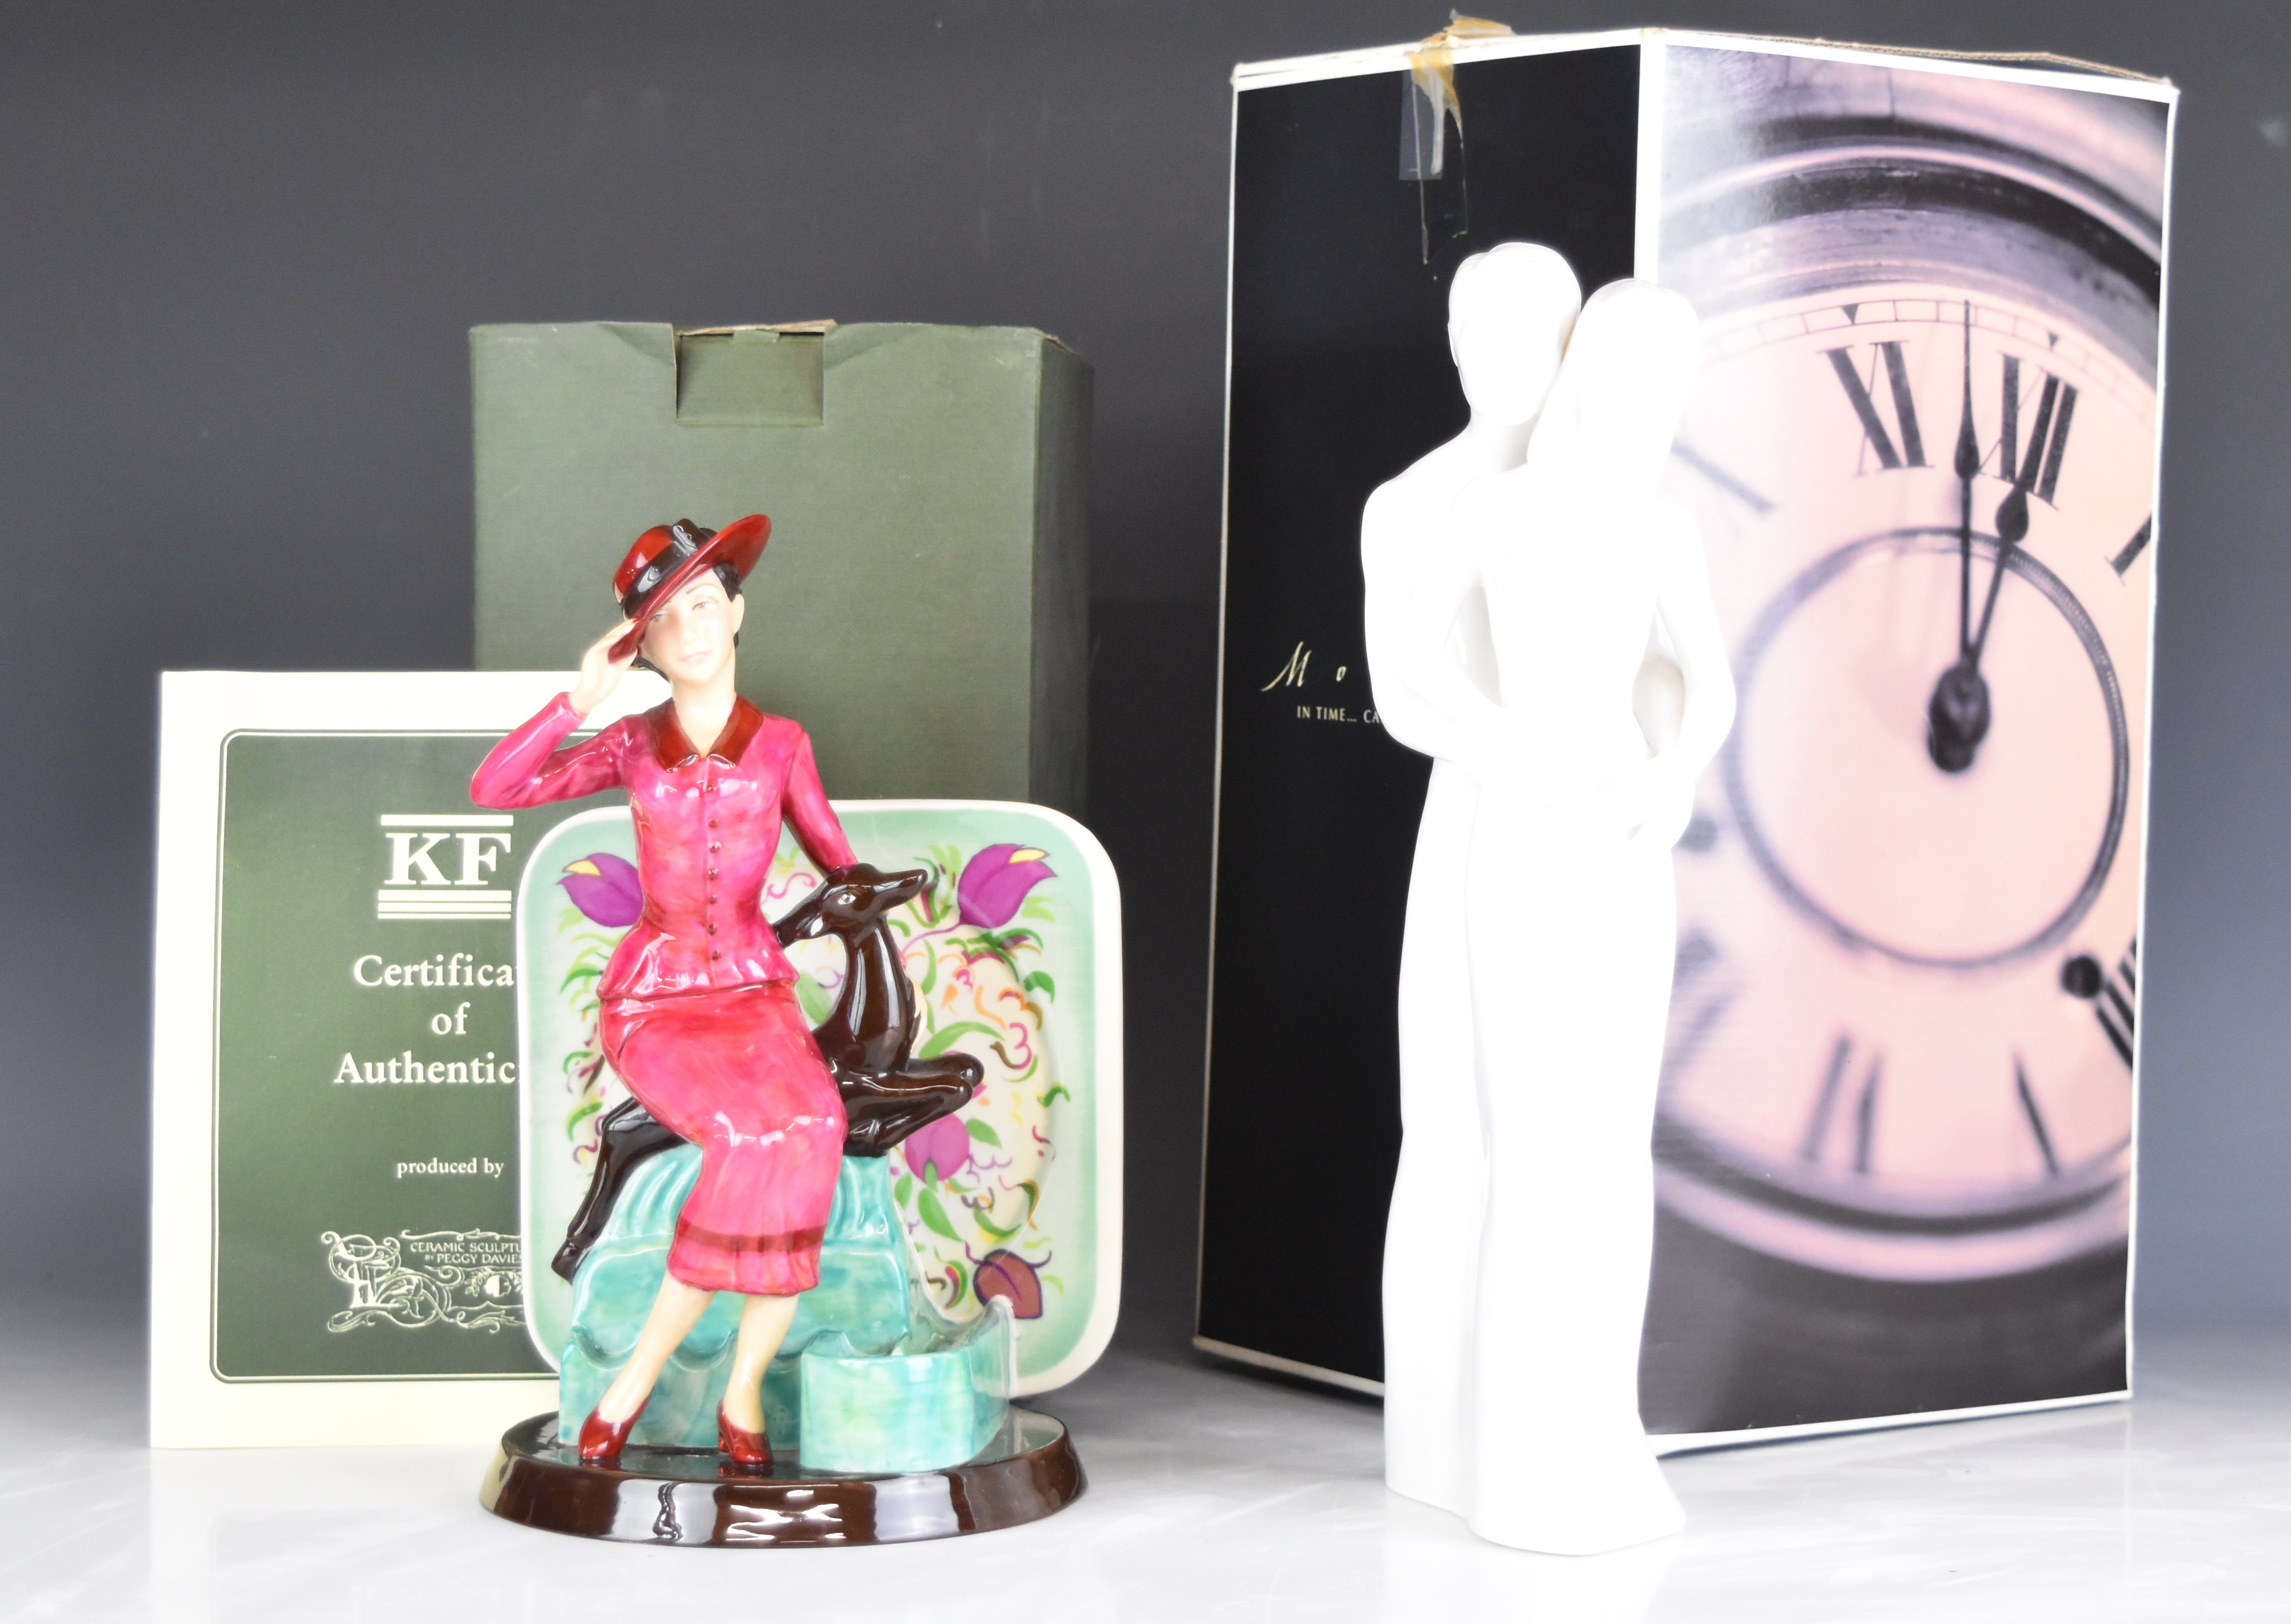 Kevin Francis limited edition figure of Susie Cooper and a Coalport 'In Love' figure, tallest 30cm